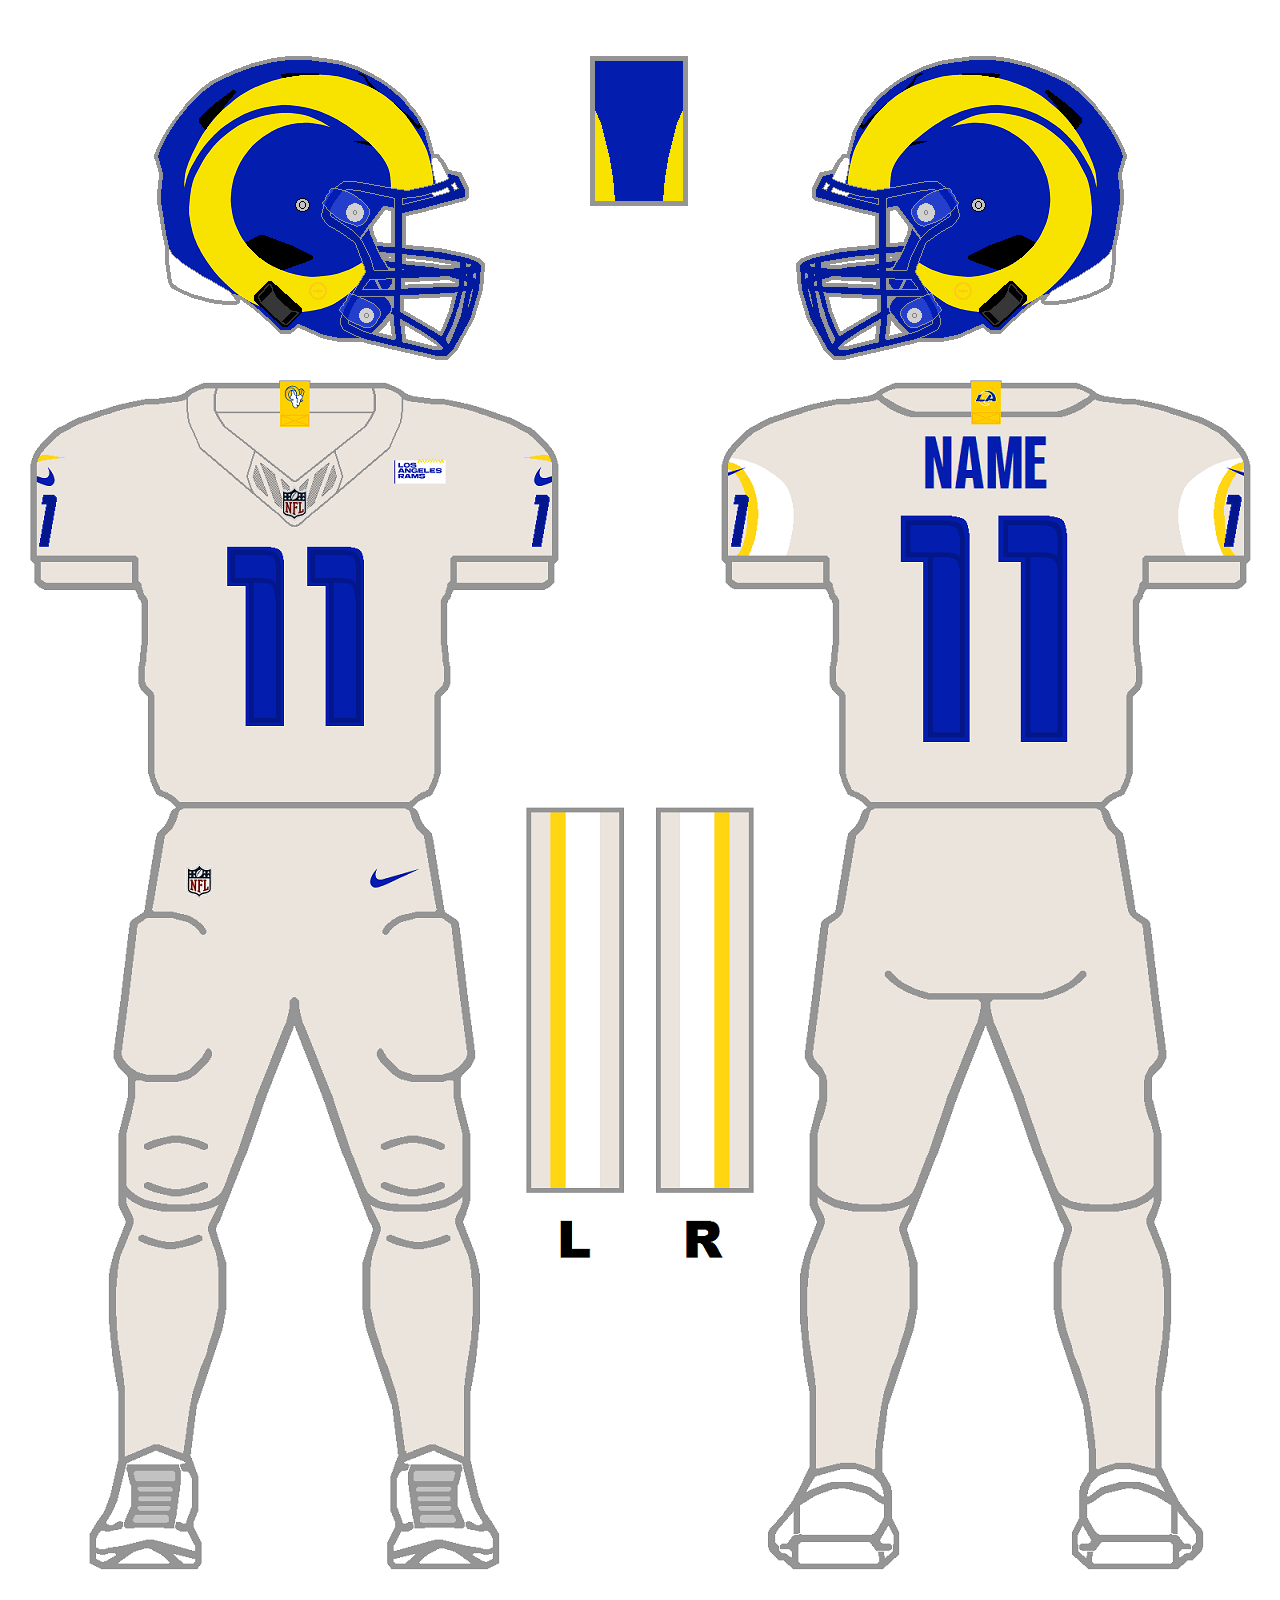 Los Angeles Chargers Home Uniform - National Football League (NFL) - Chris  Creamer's Sports Logos Page 